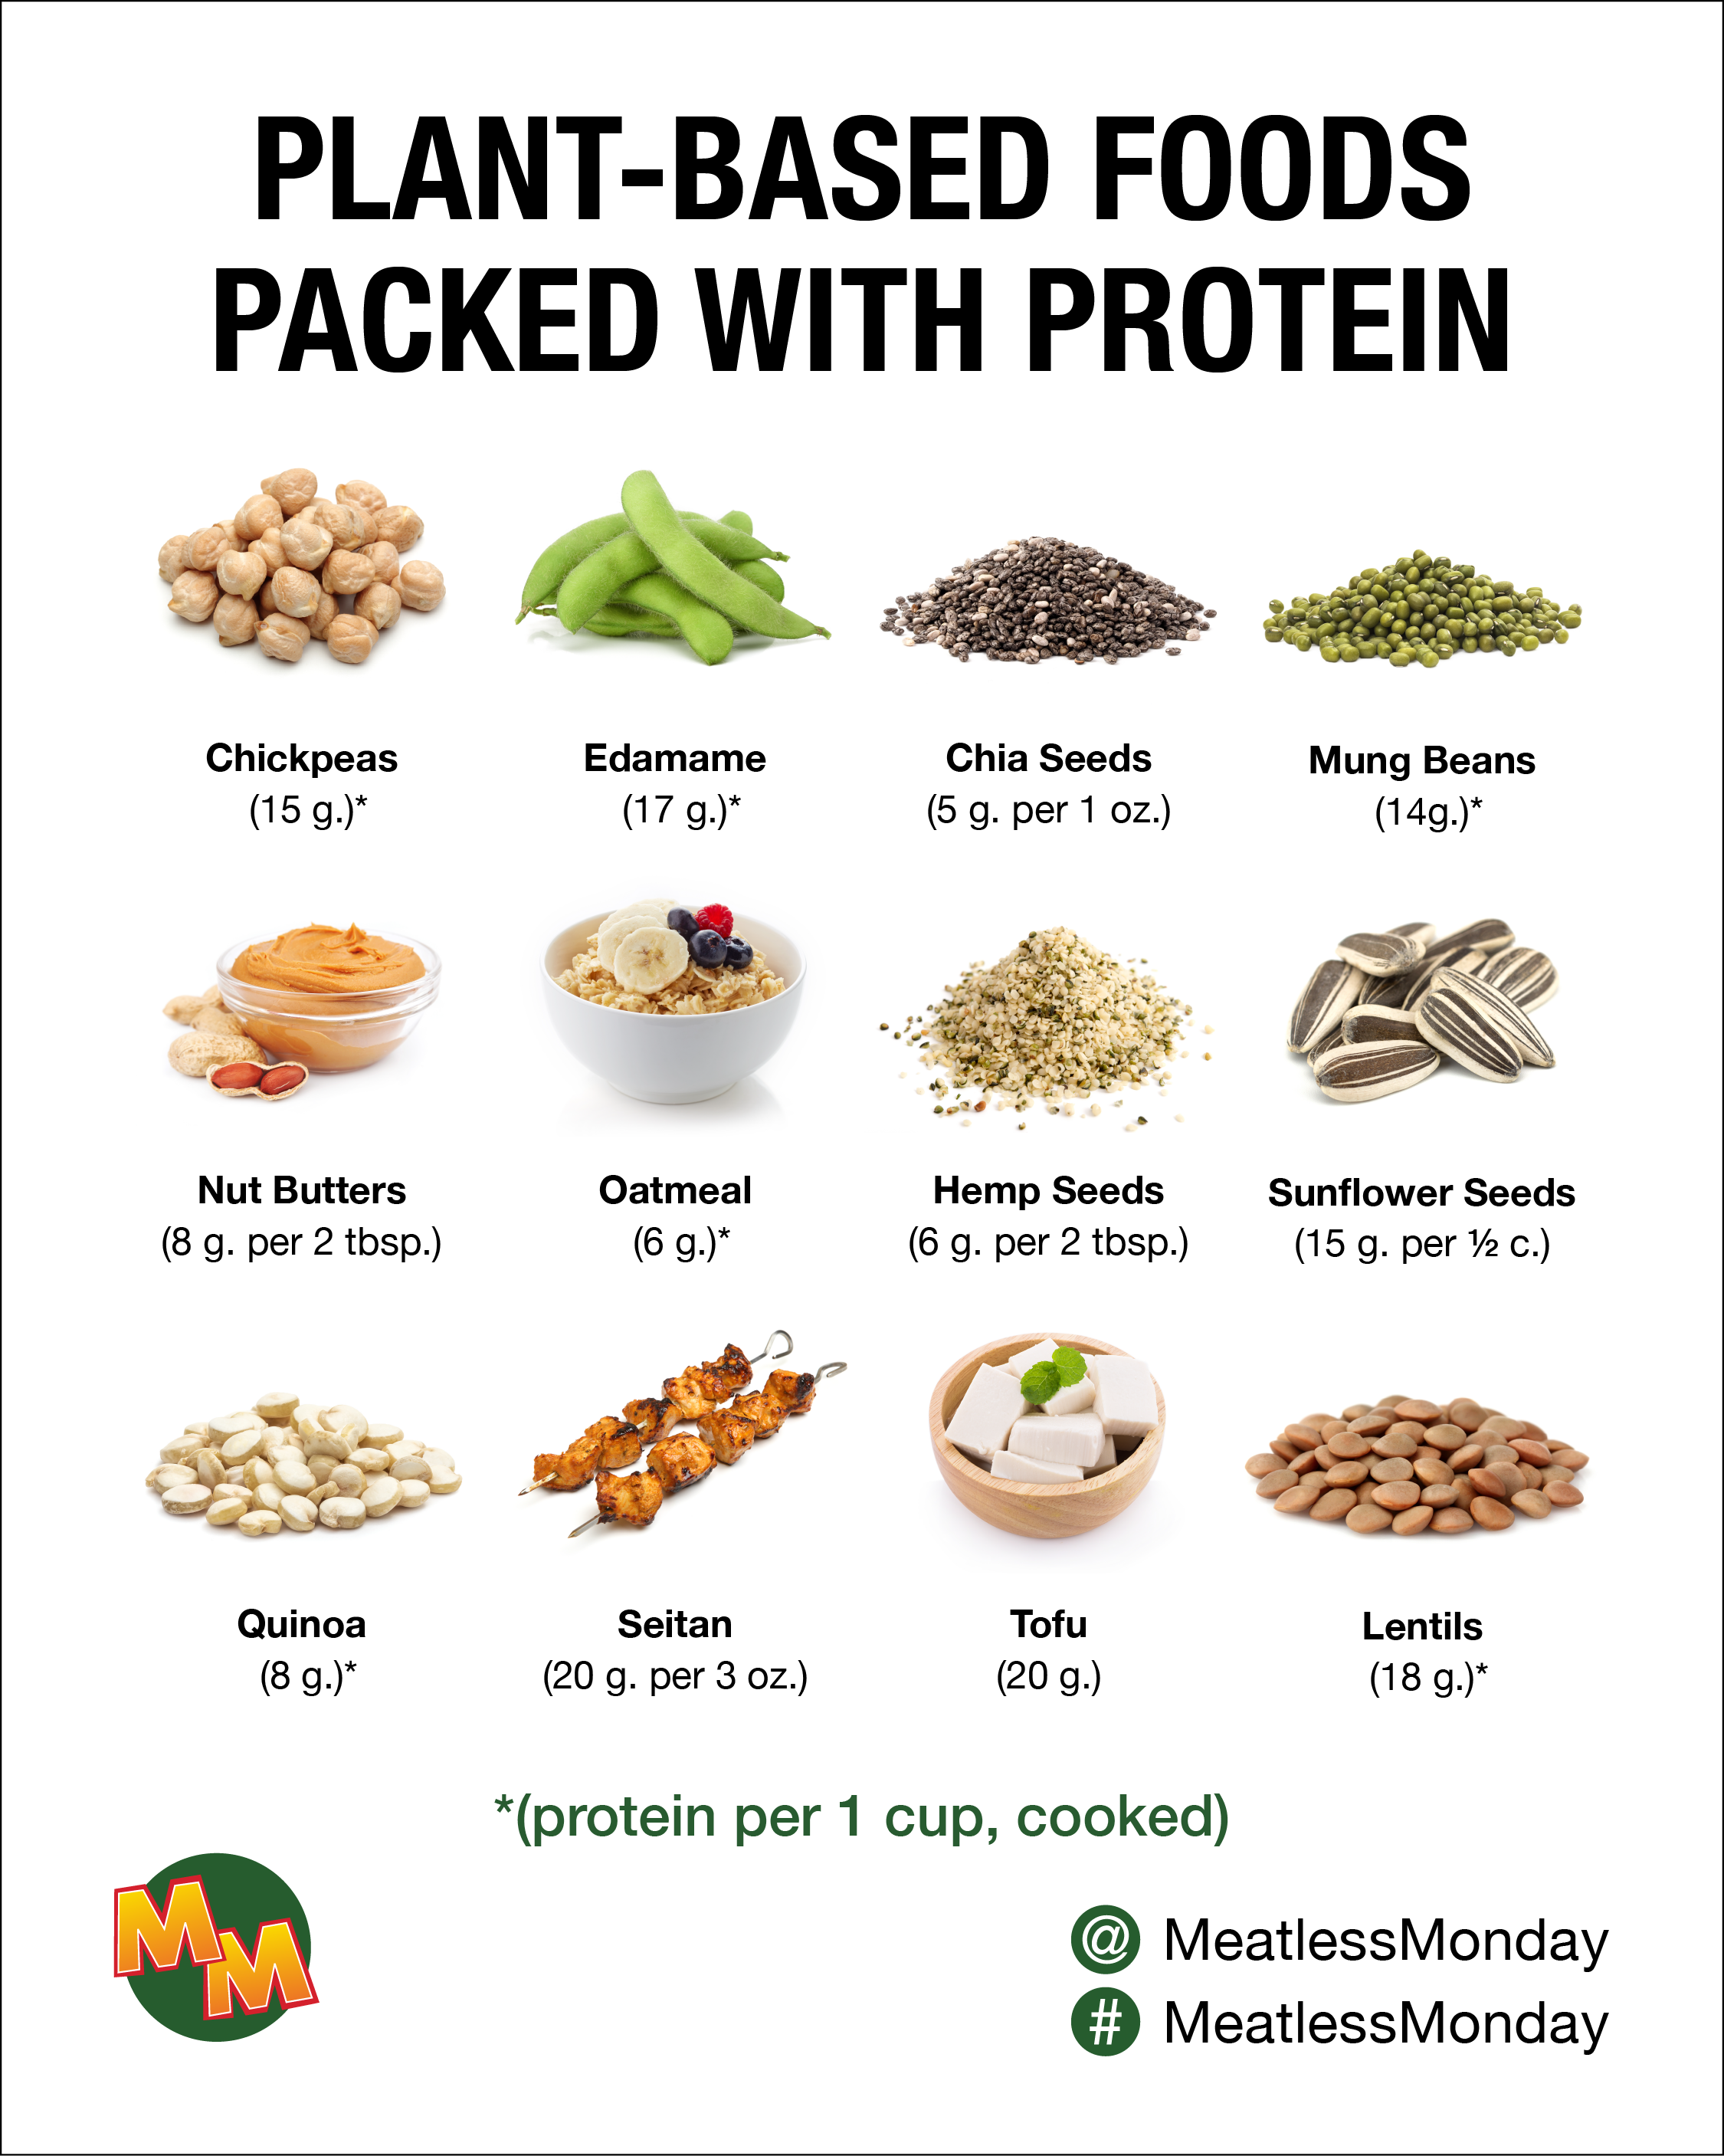 Plant-based protein sources